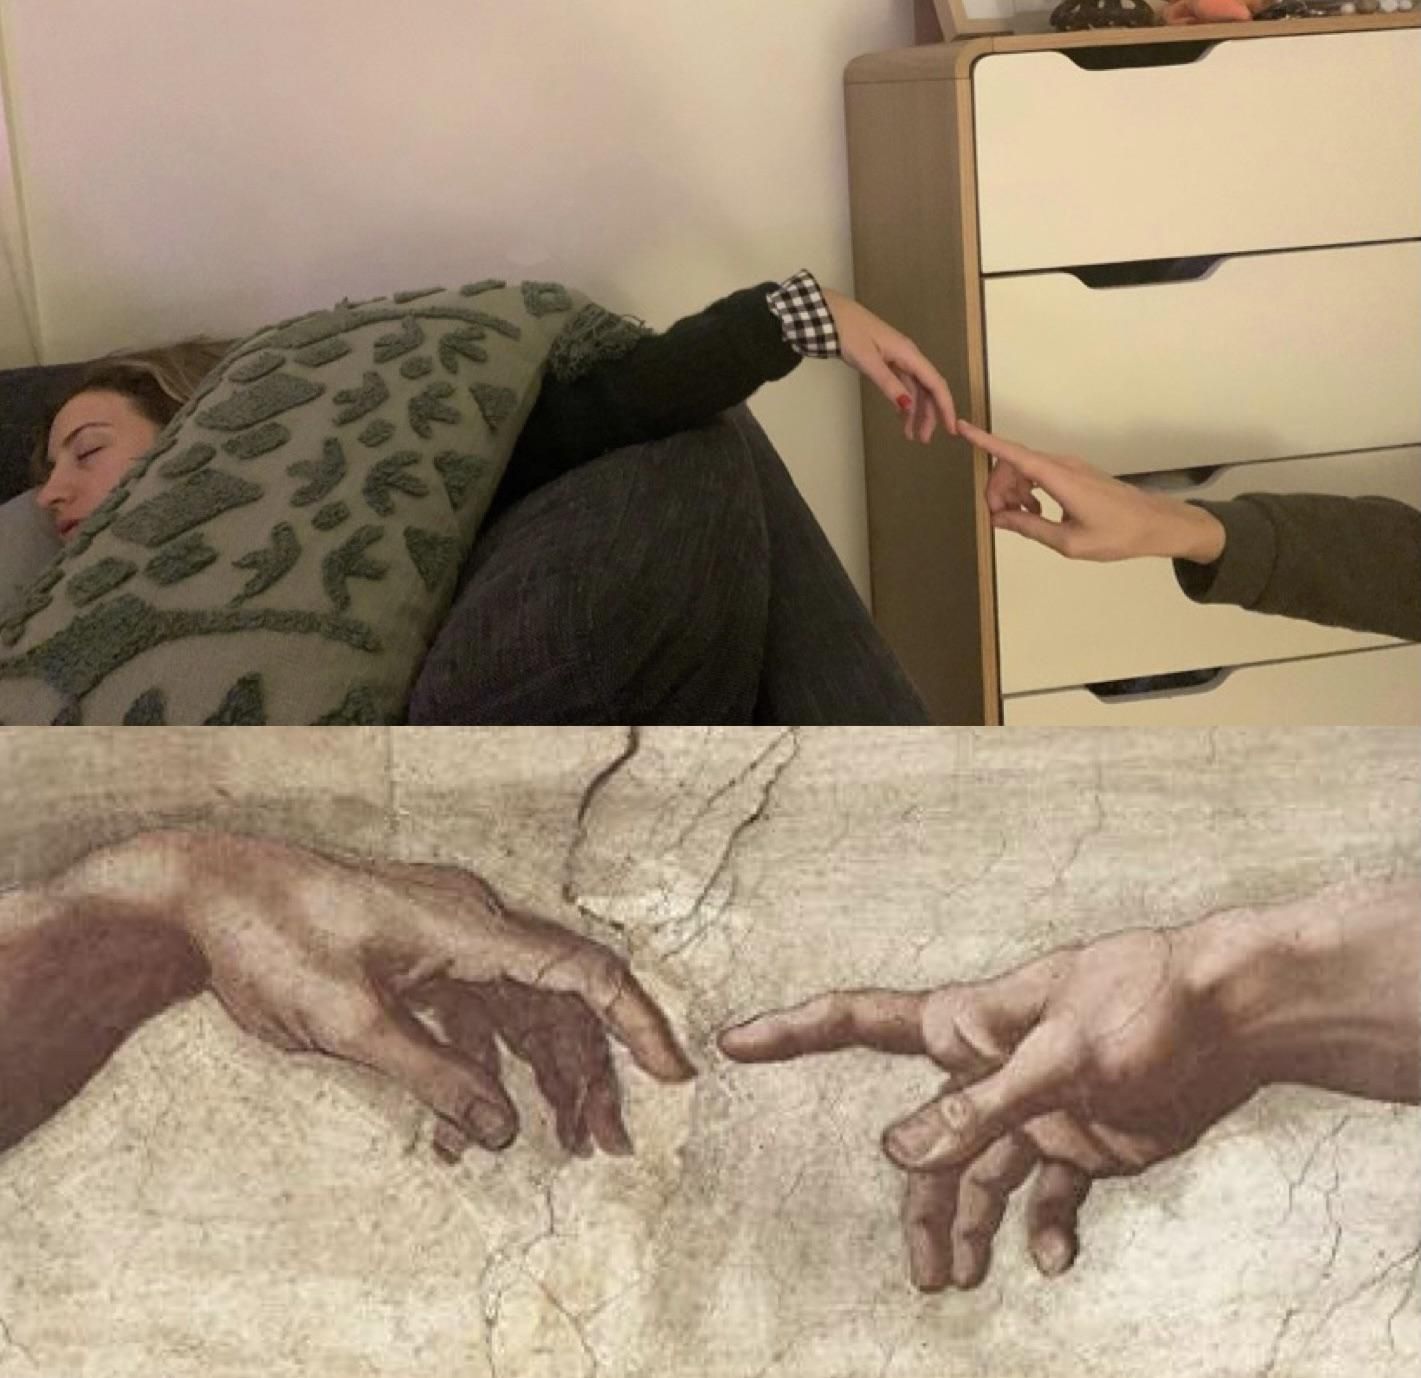 My wife fell asleep like this during a move so I decided to recreate ‘The creation of Adam’